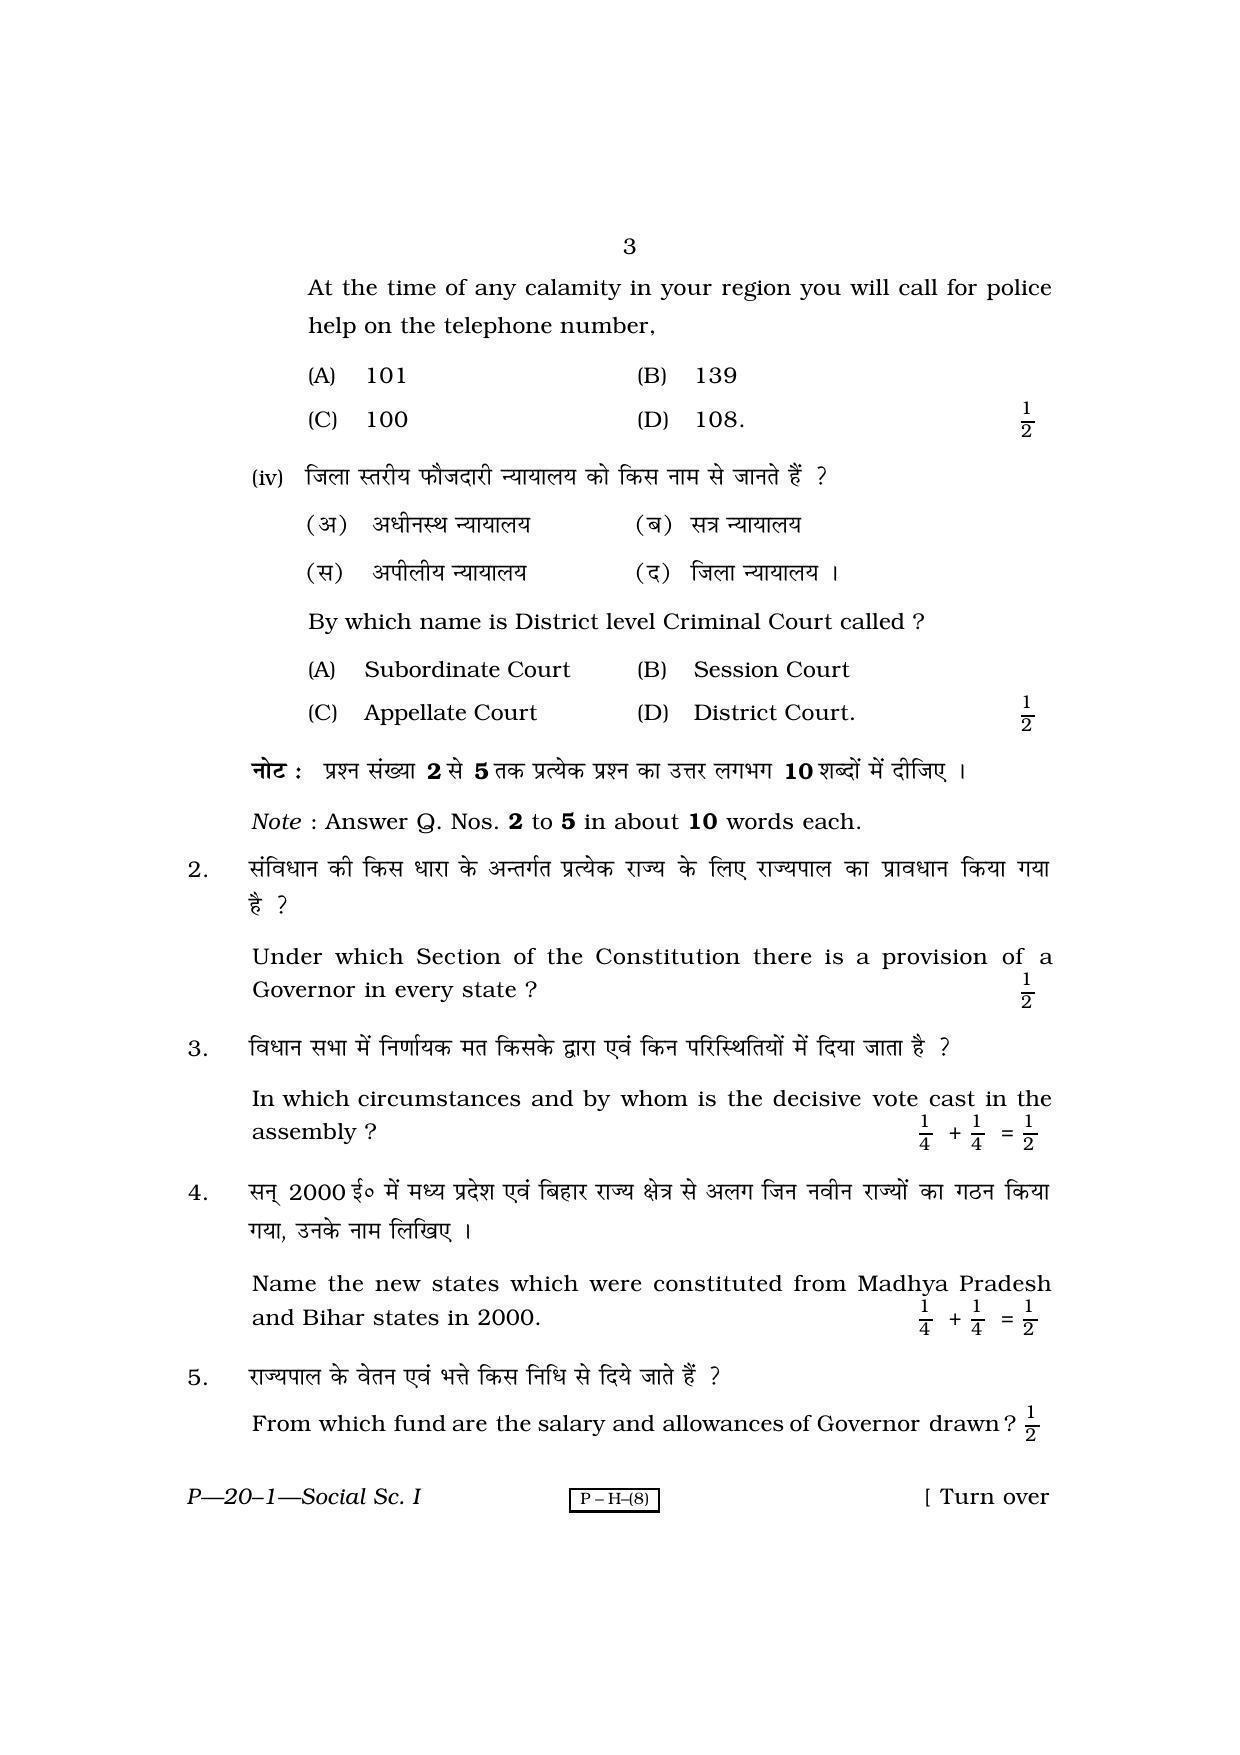 RBSE 2010 Social Science I Praveshika Question Paper - Page 3